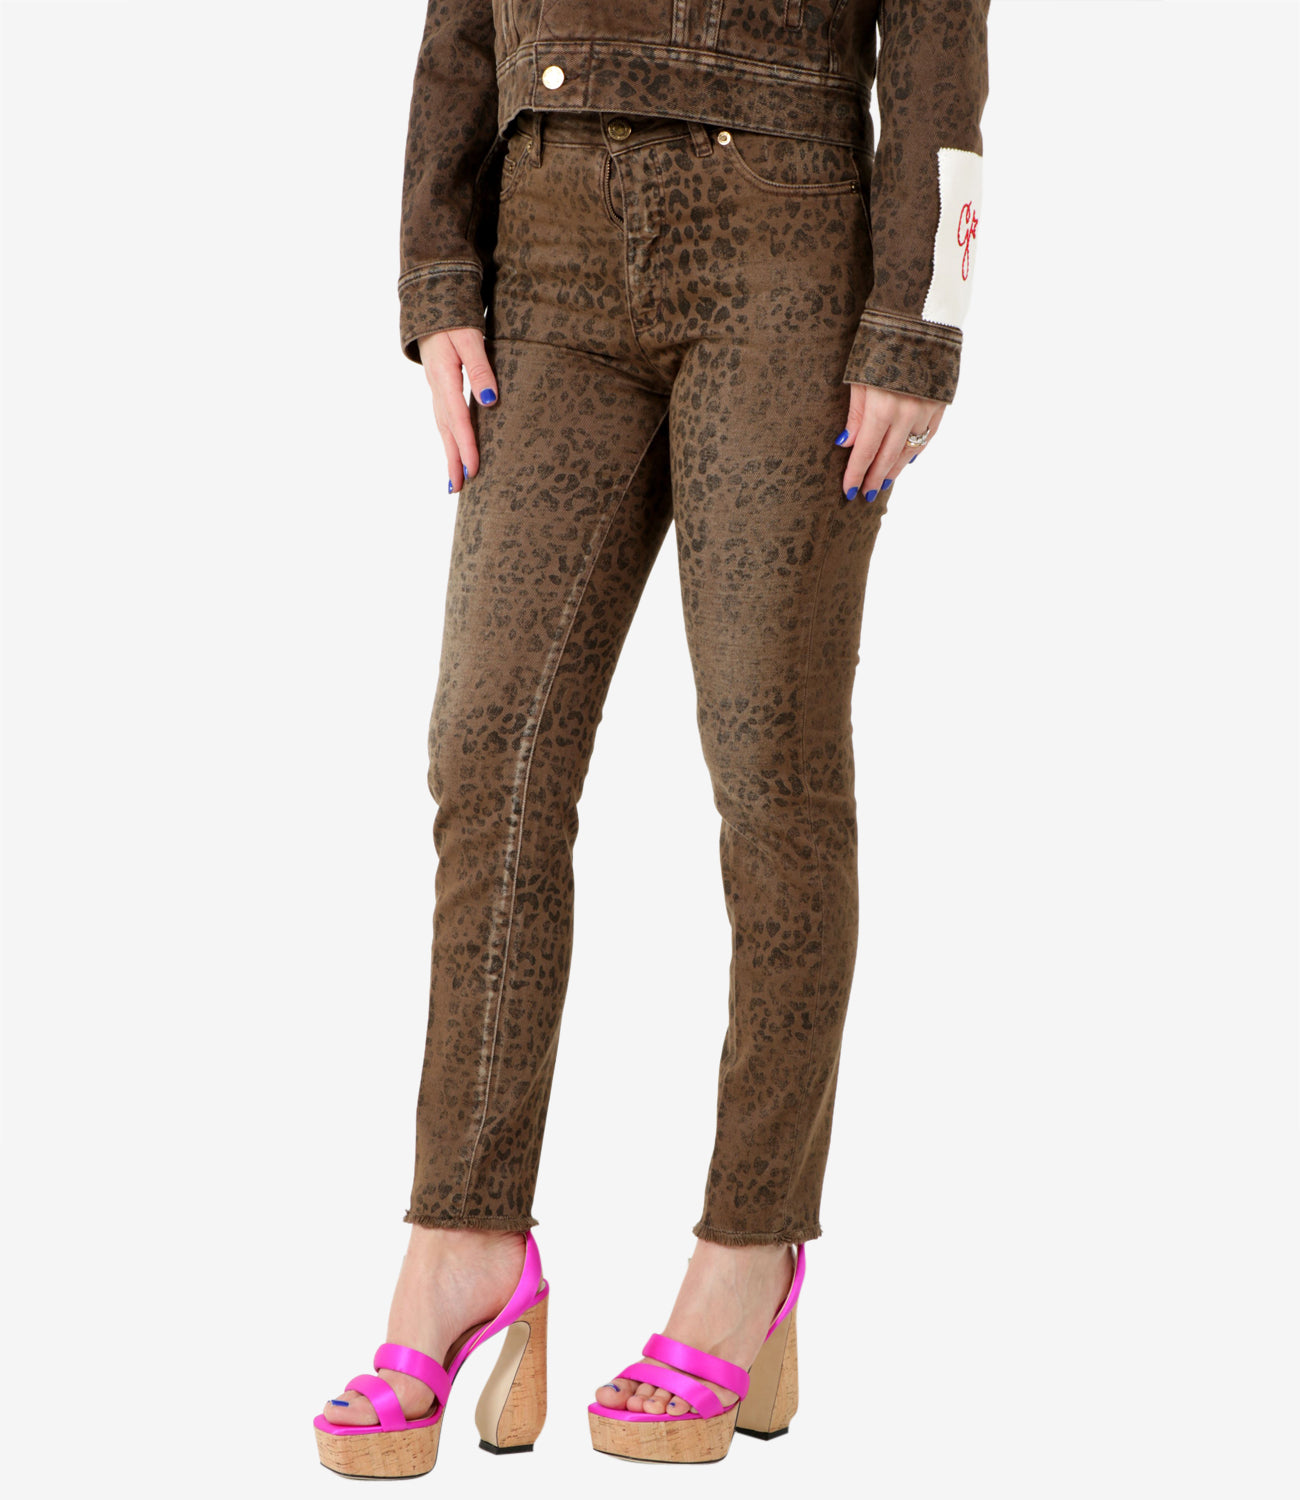 Golden Goose Deluxe Brand | Pantalone Skinny Faded Leopard Print Stretch